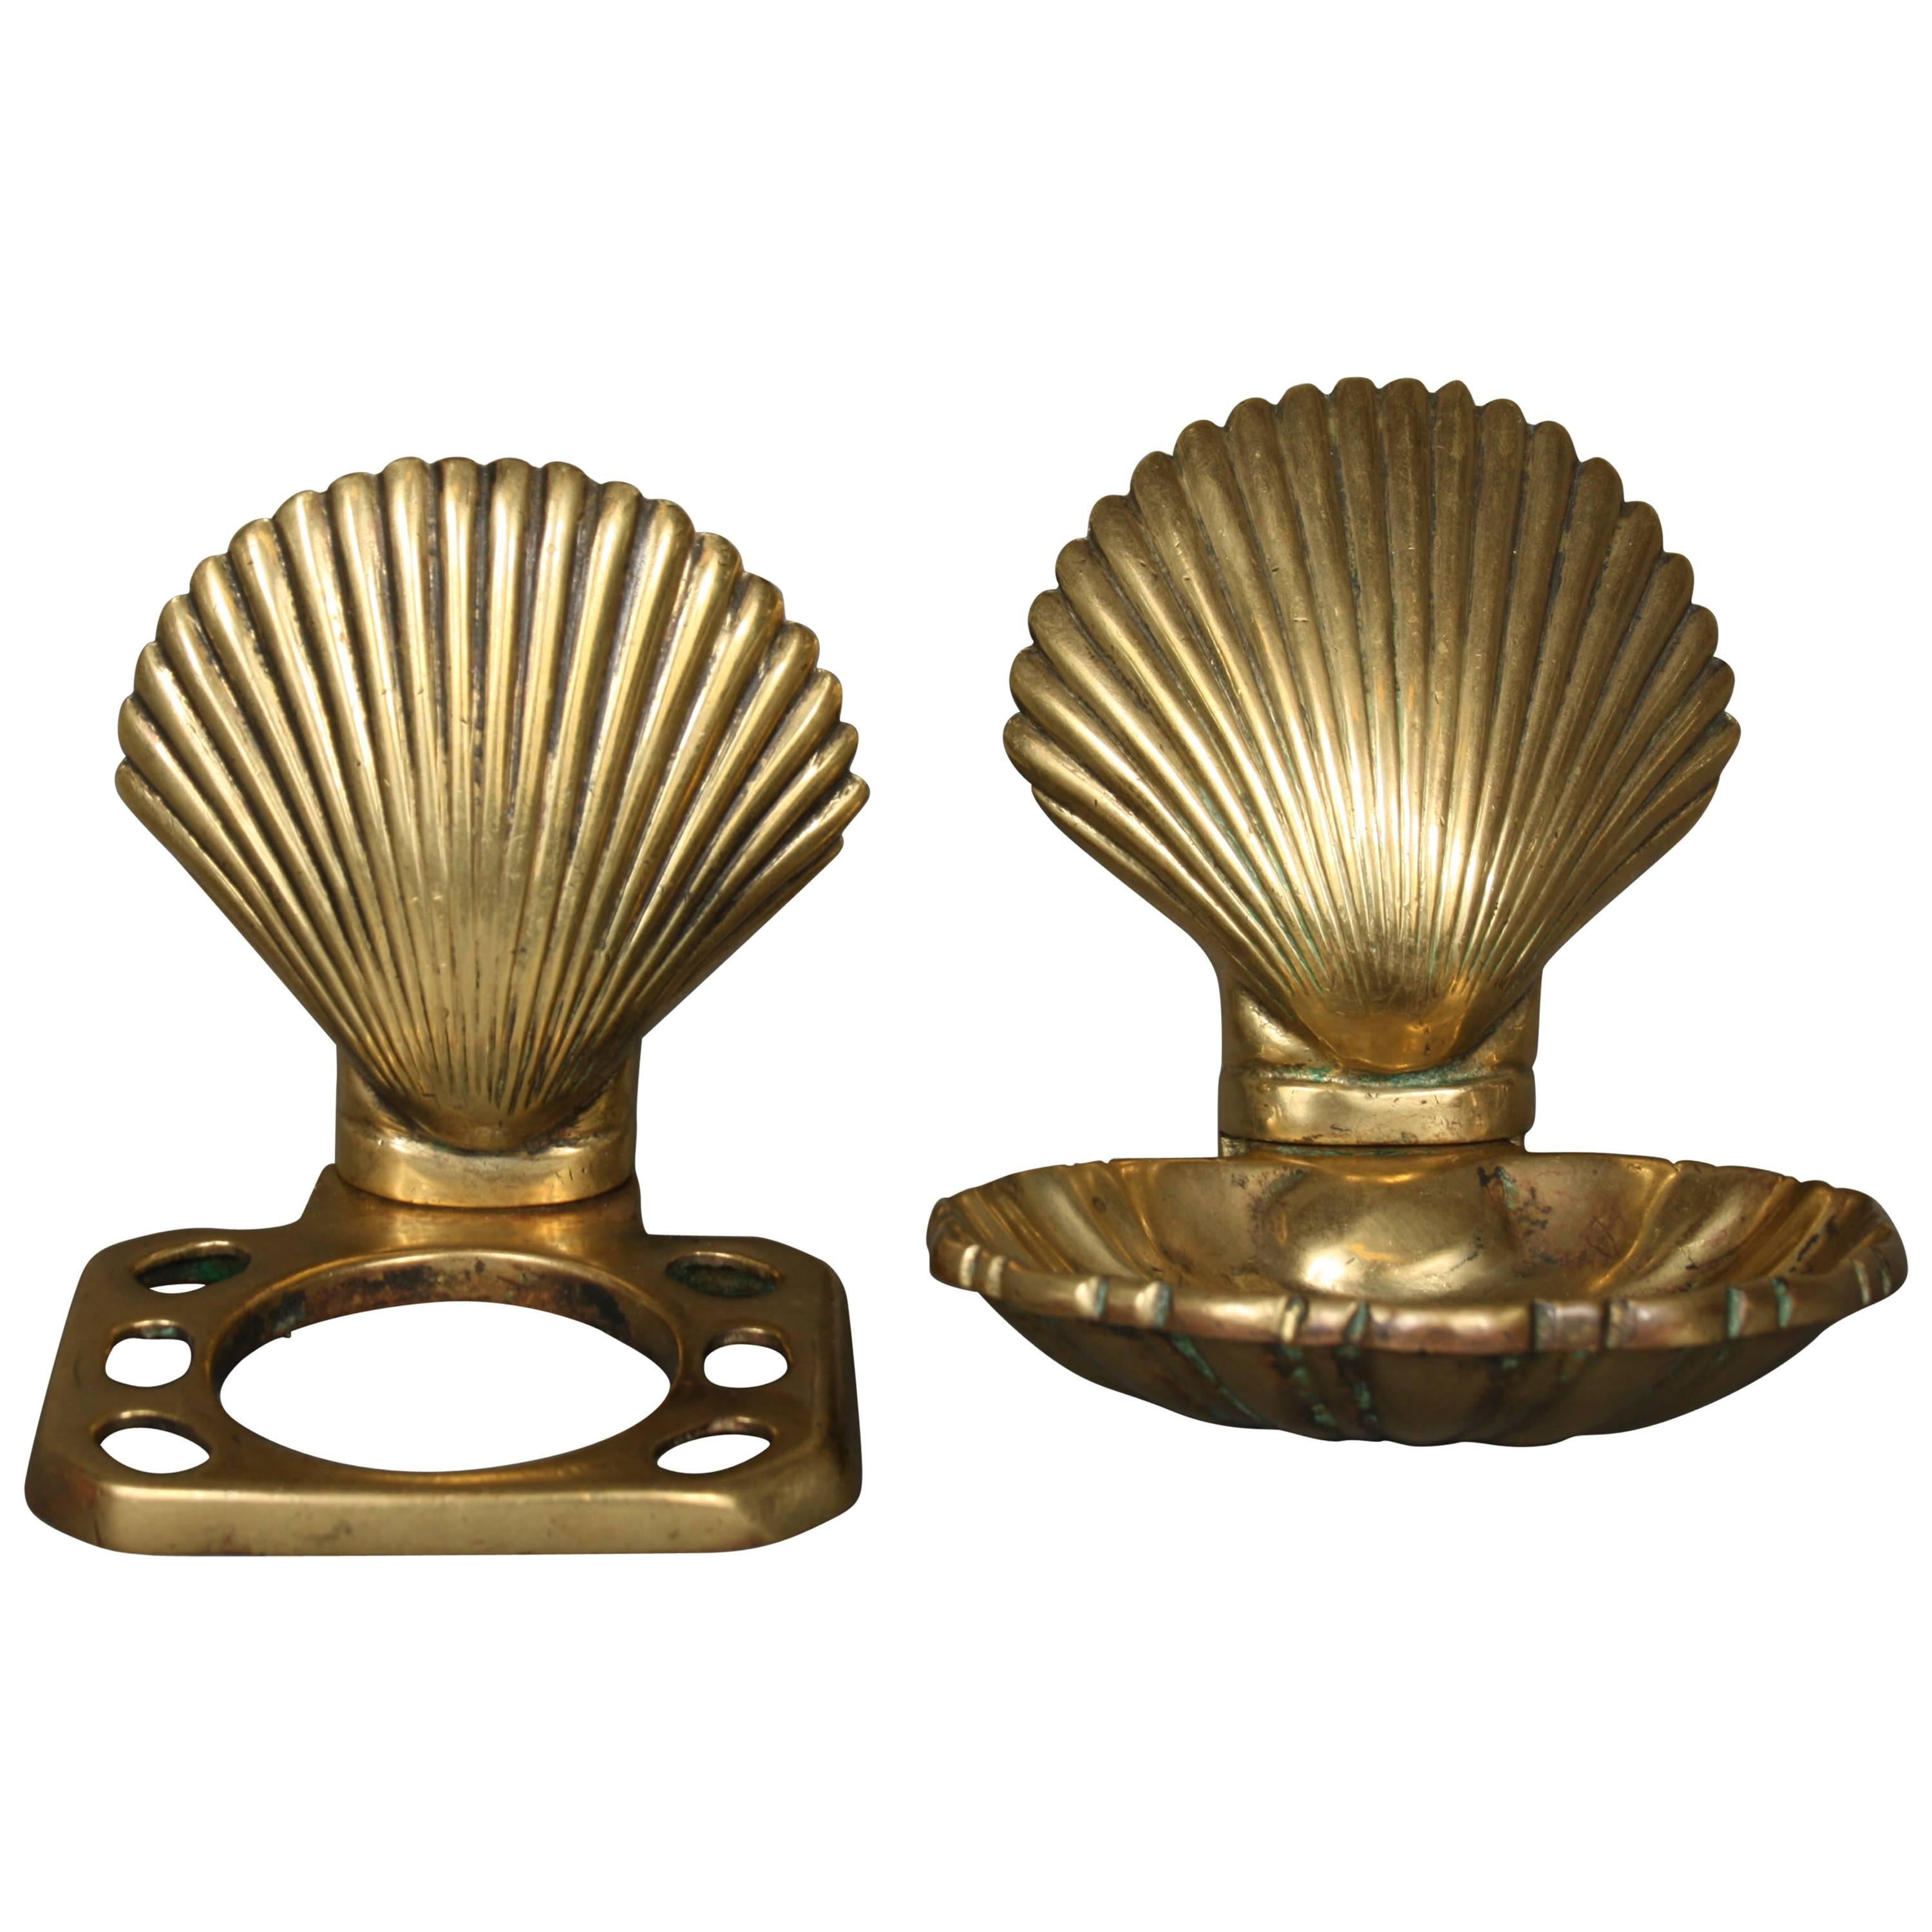 Shell Shaped Soap Dish and Toothbrush Holder, Brass, 1950s For Sale